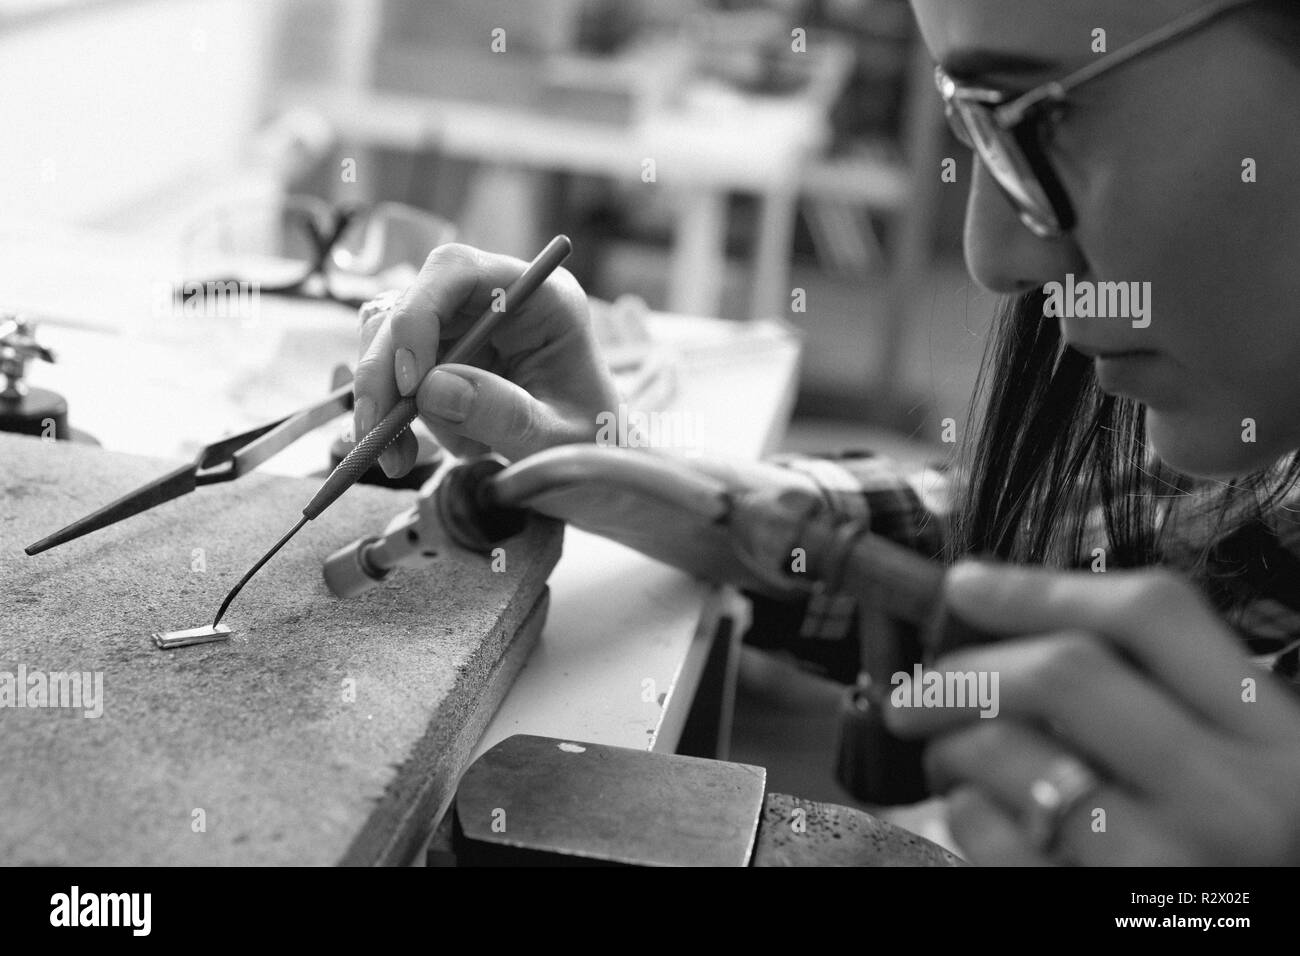 Jeweler at work, crafting in a jewelry workshop. Stock Photo